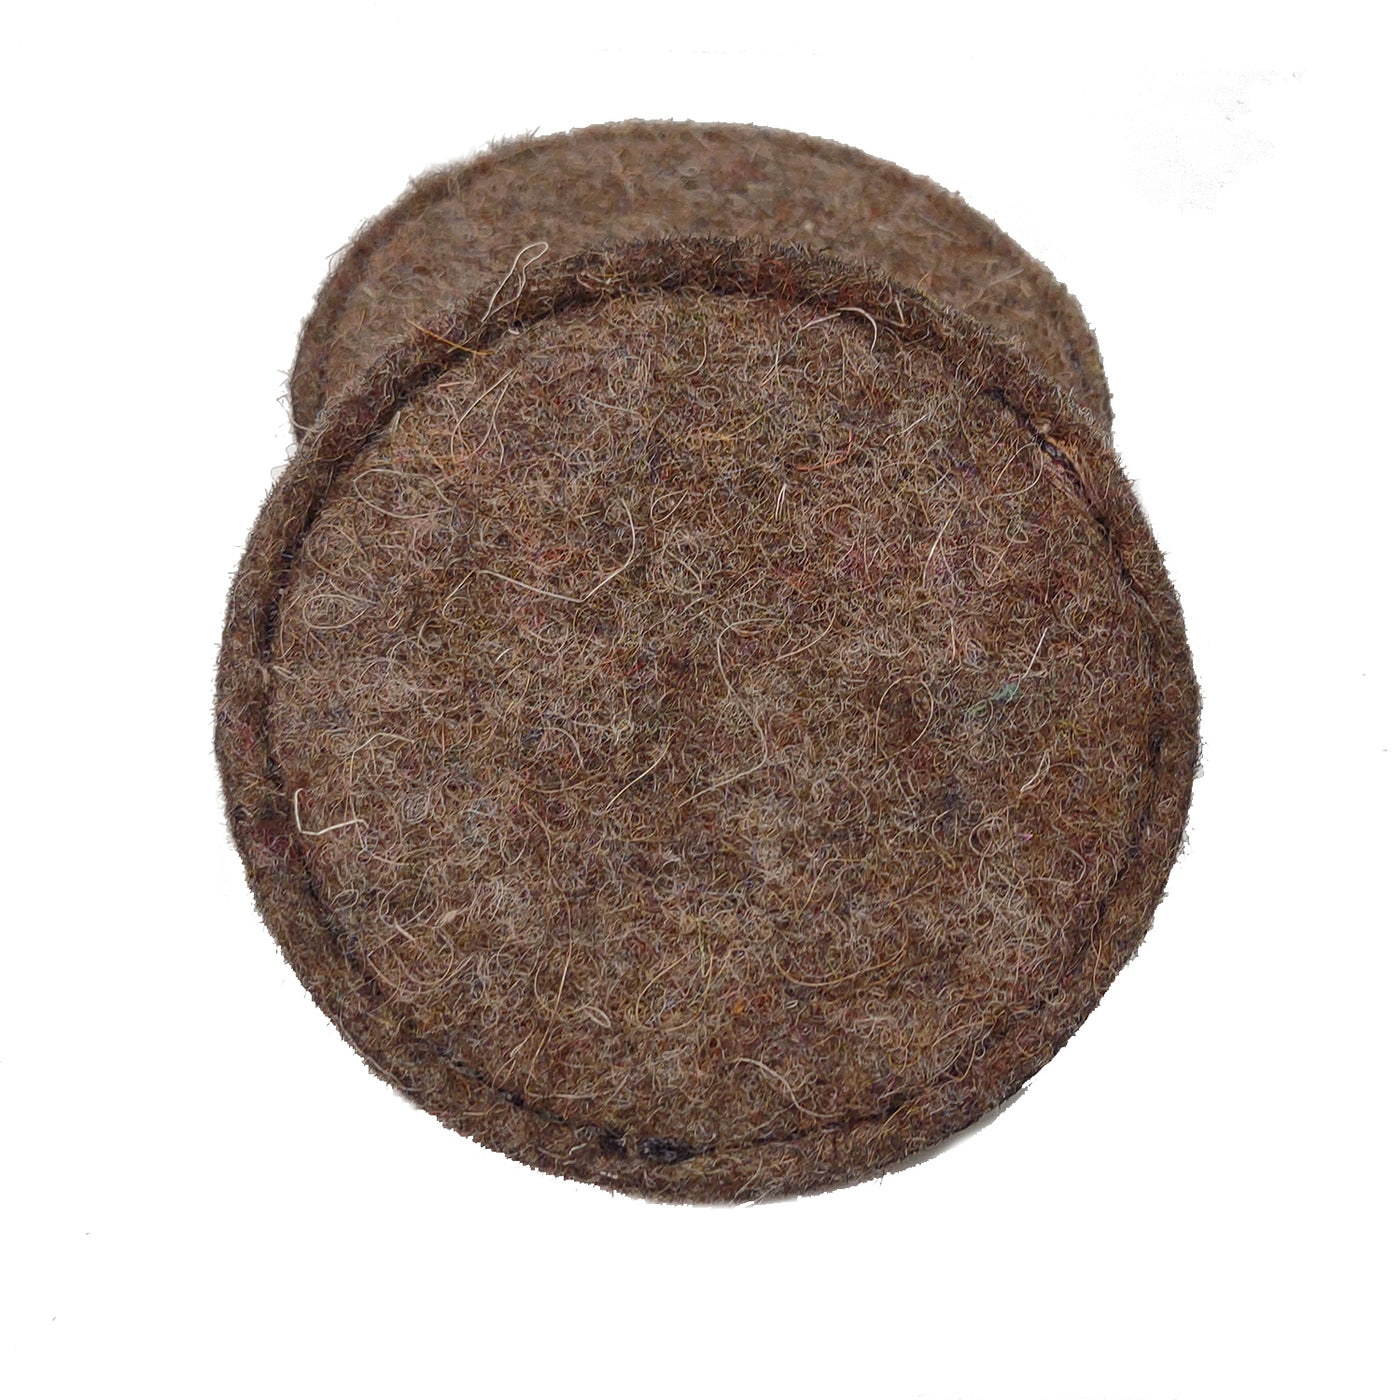 Bison leather and felt coasters